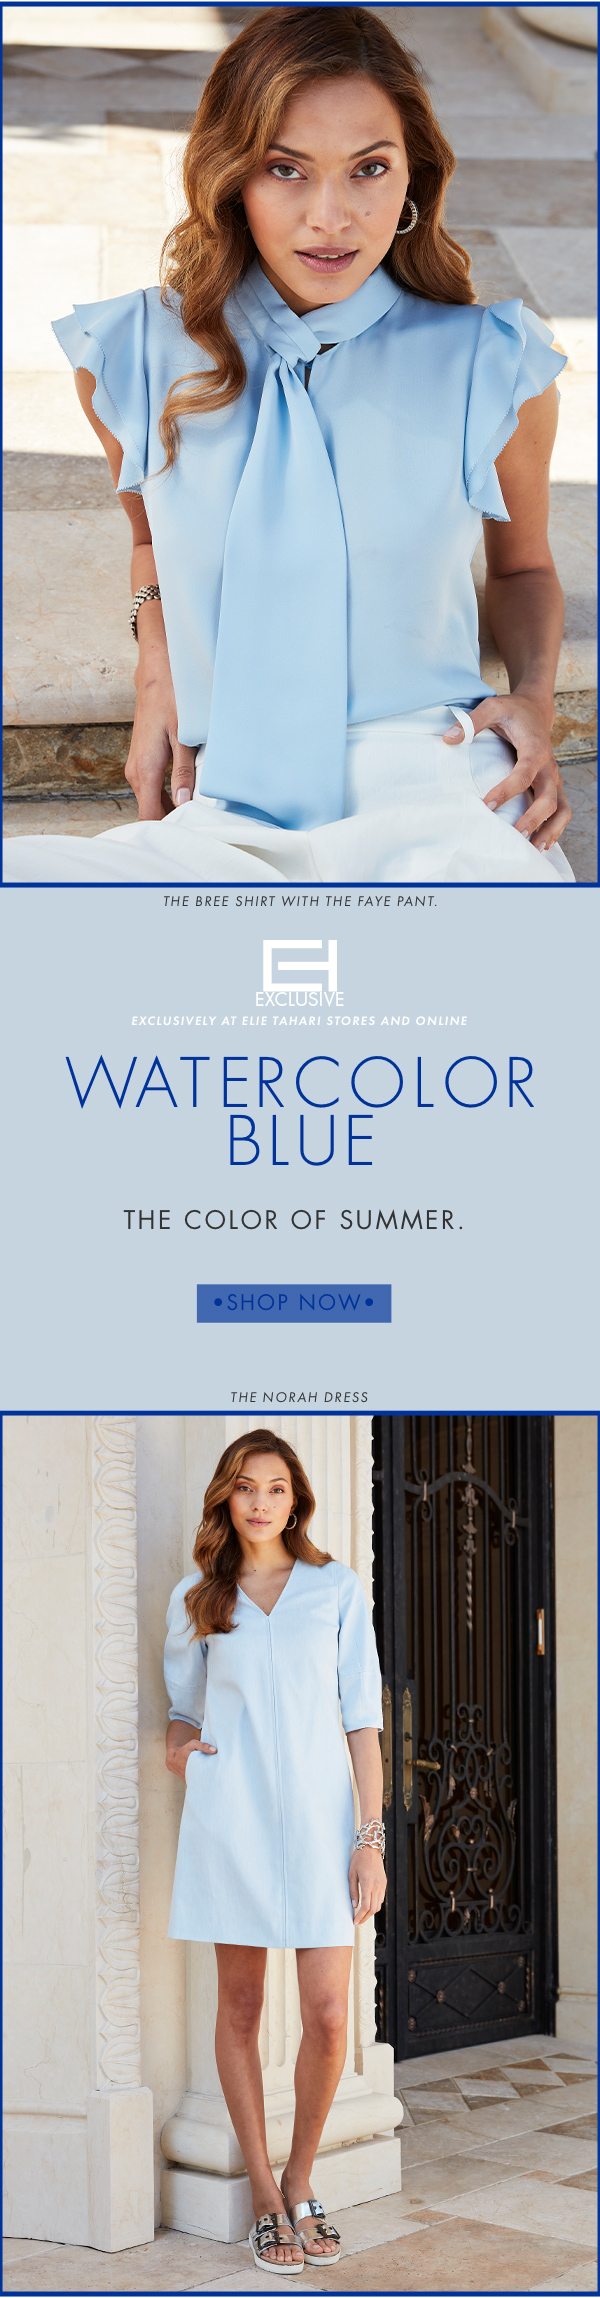 Exclusively WaterColor - The Color of Summer